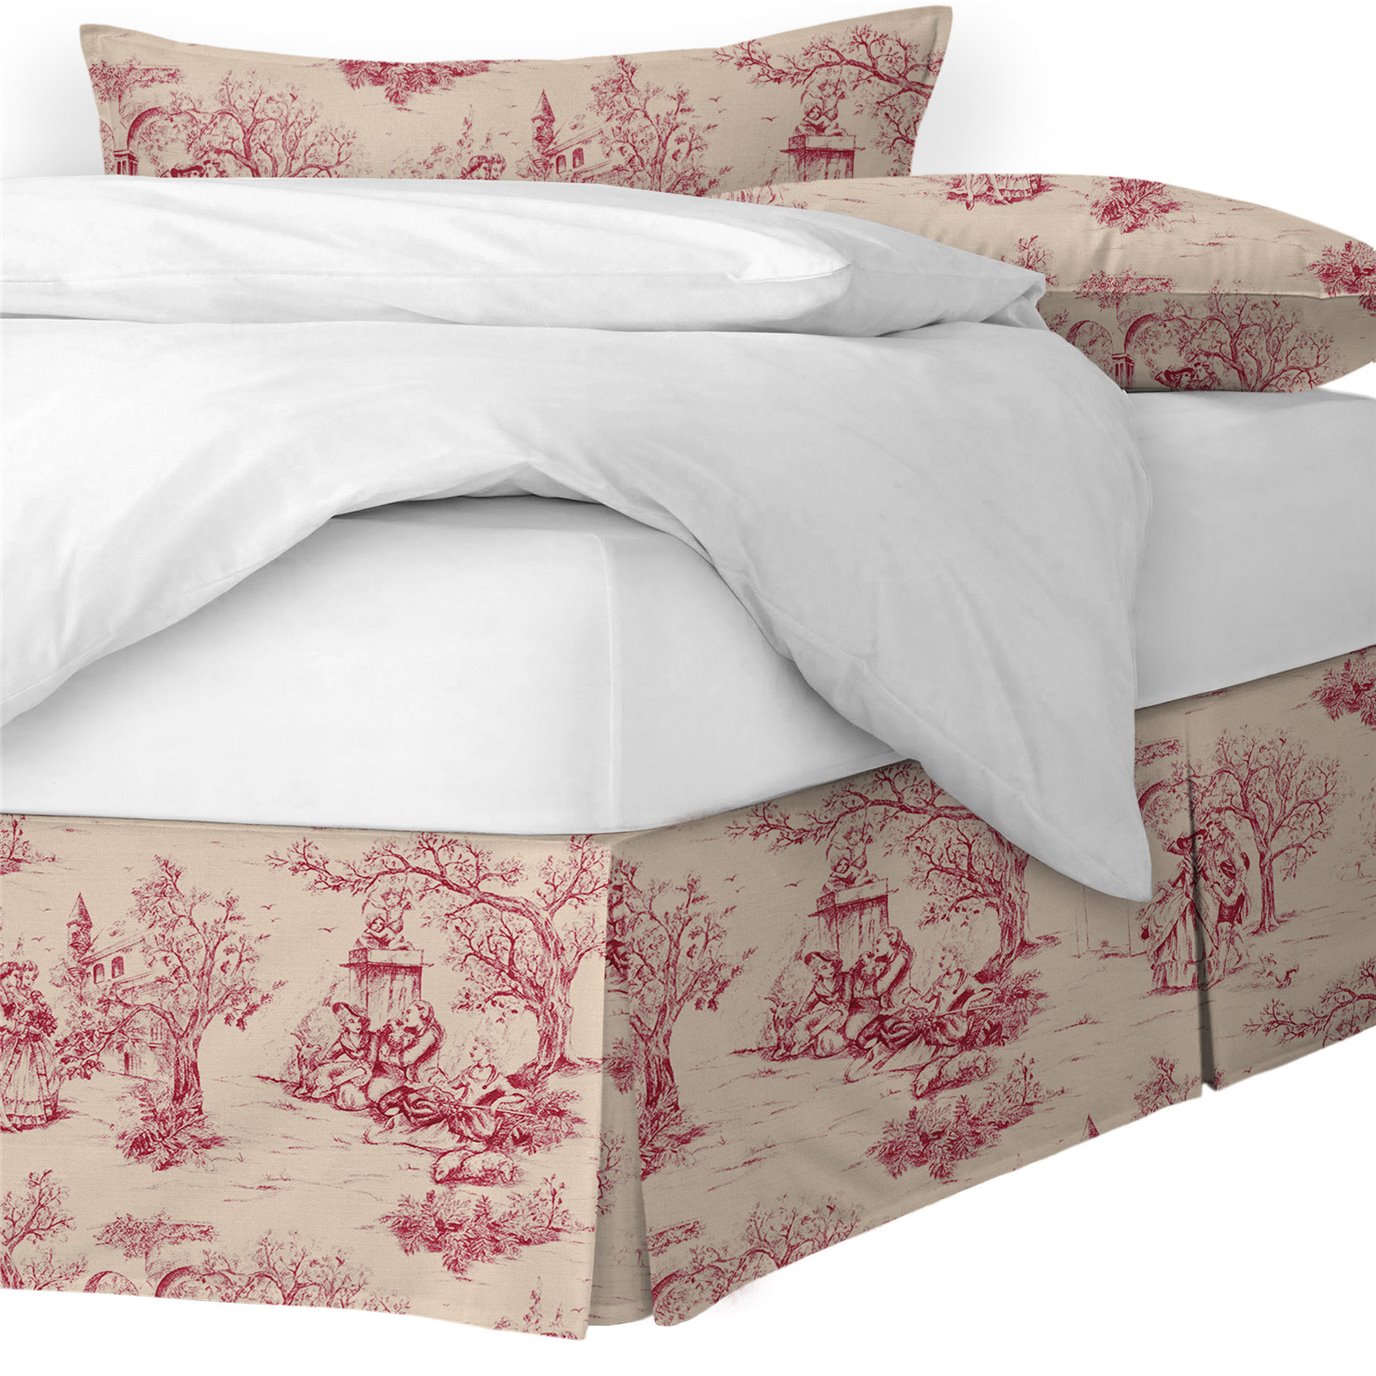 Archamps Toile Red Platform Bed Skirt - Size Queen 15" Drop